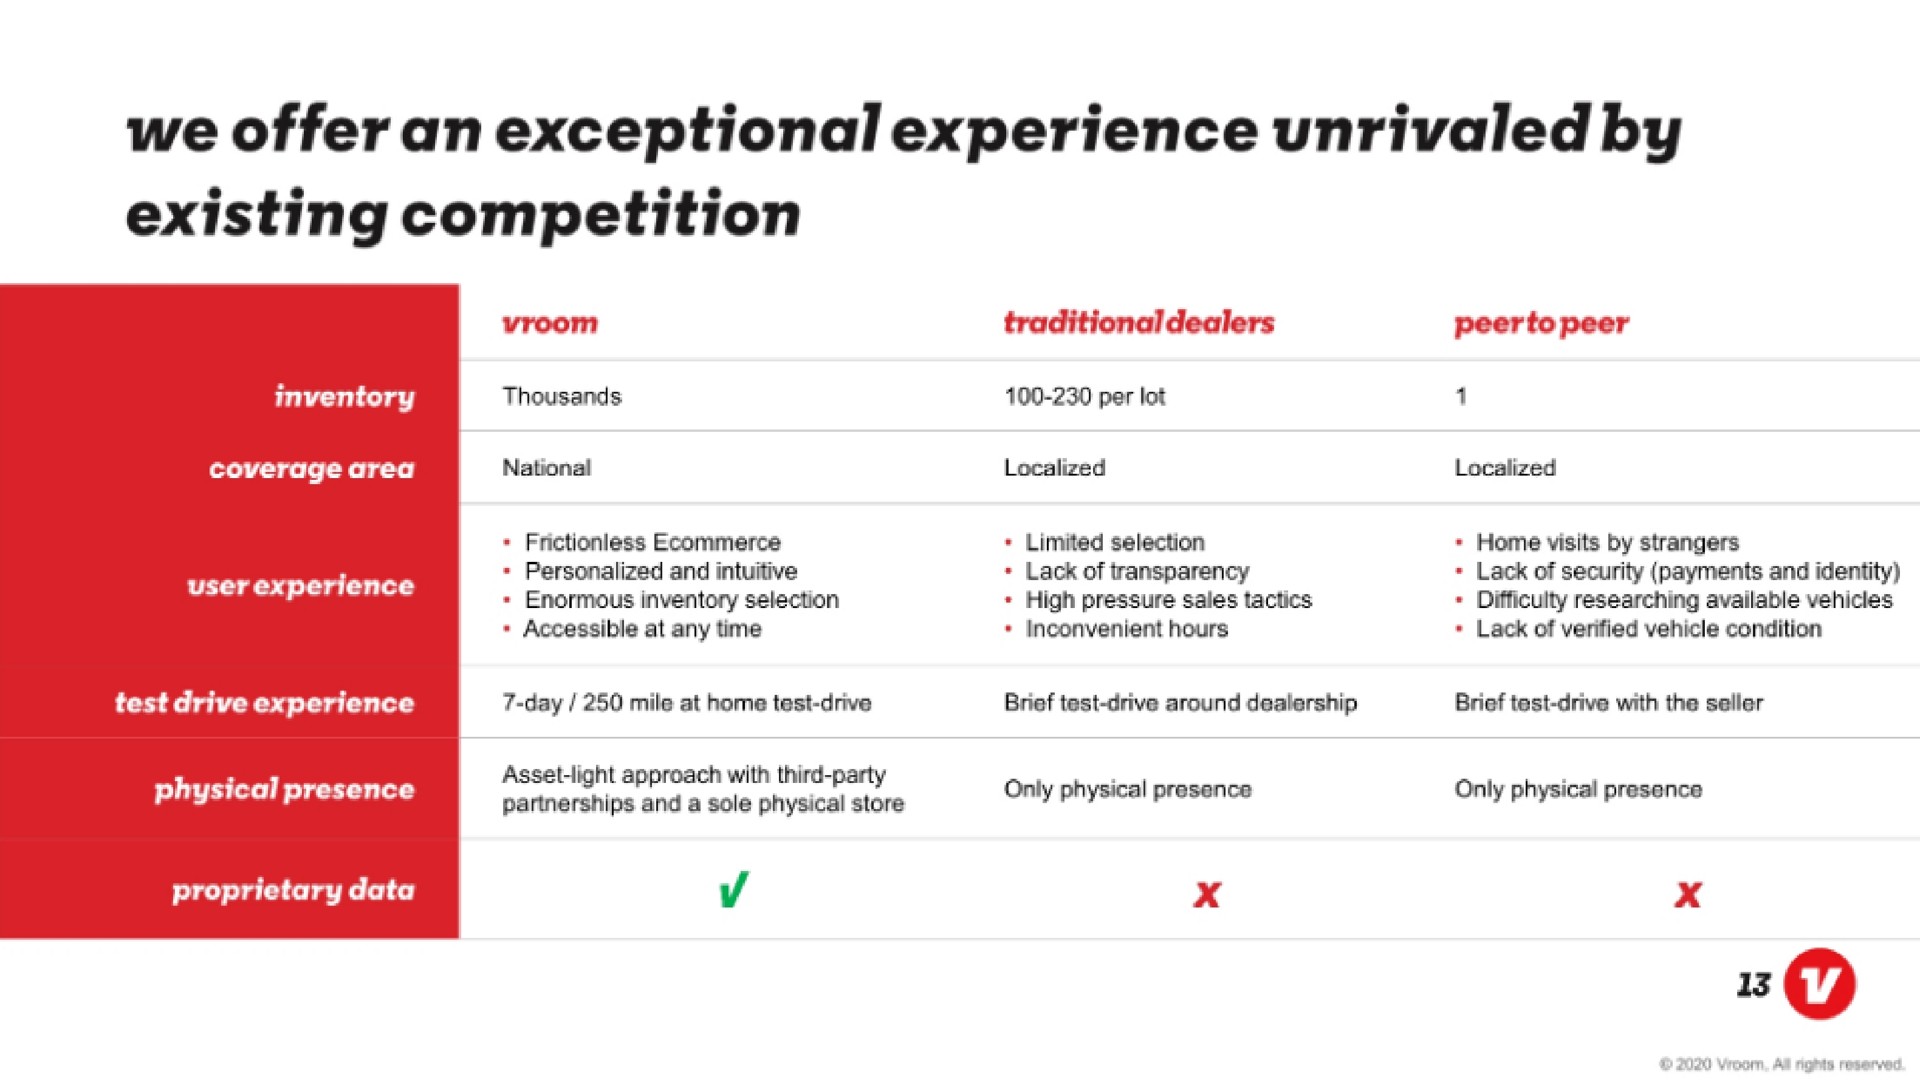 we offer an exceptional experience unrivaled by existing competition | Vroom